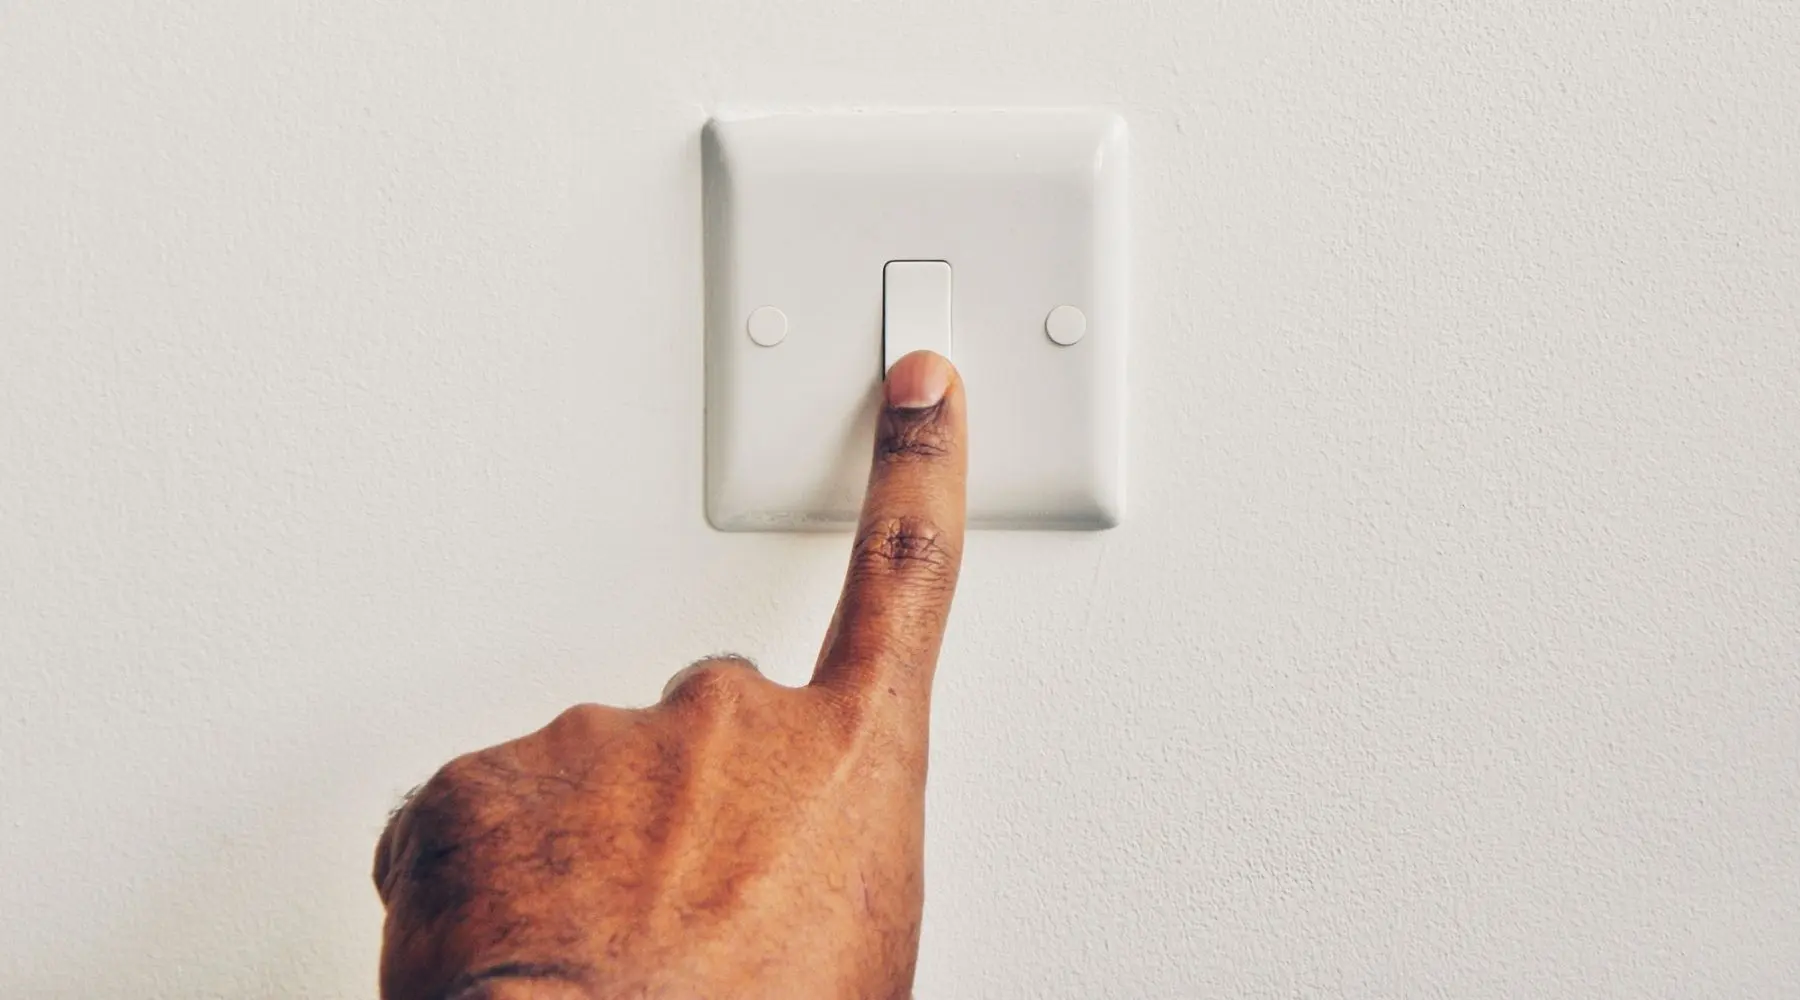 A man reaches to flick a light switch.